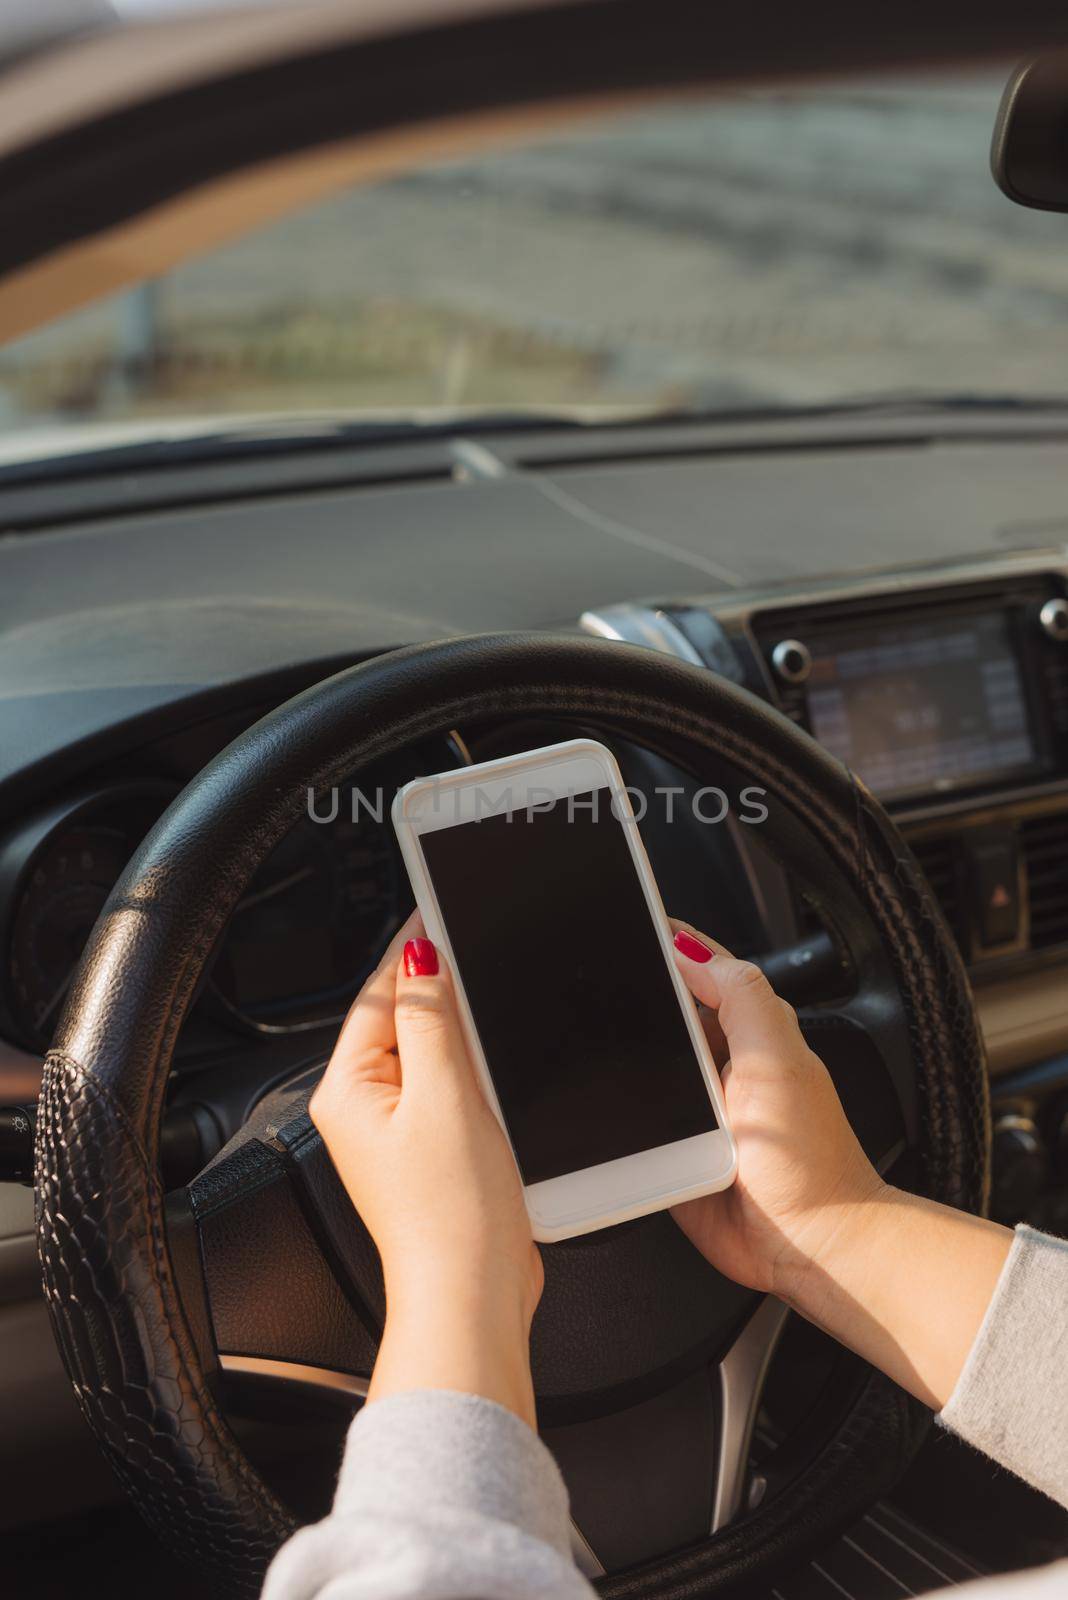 Business woman sitting in car and using her smartphone. Mockup image with female driver and phone screen